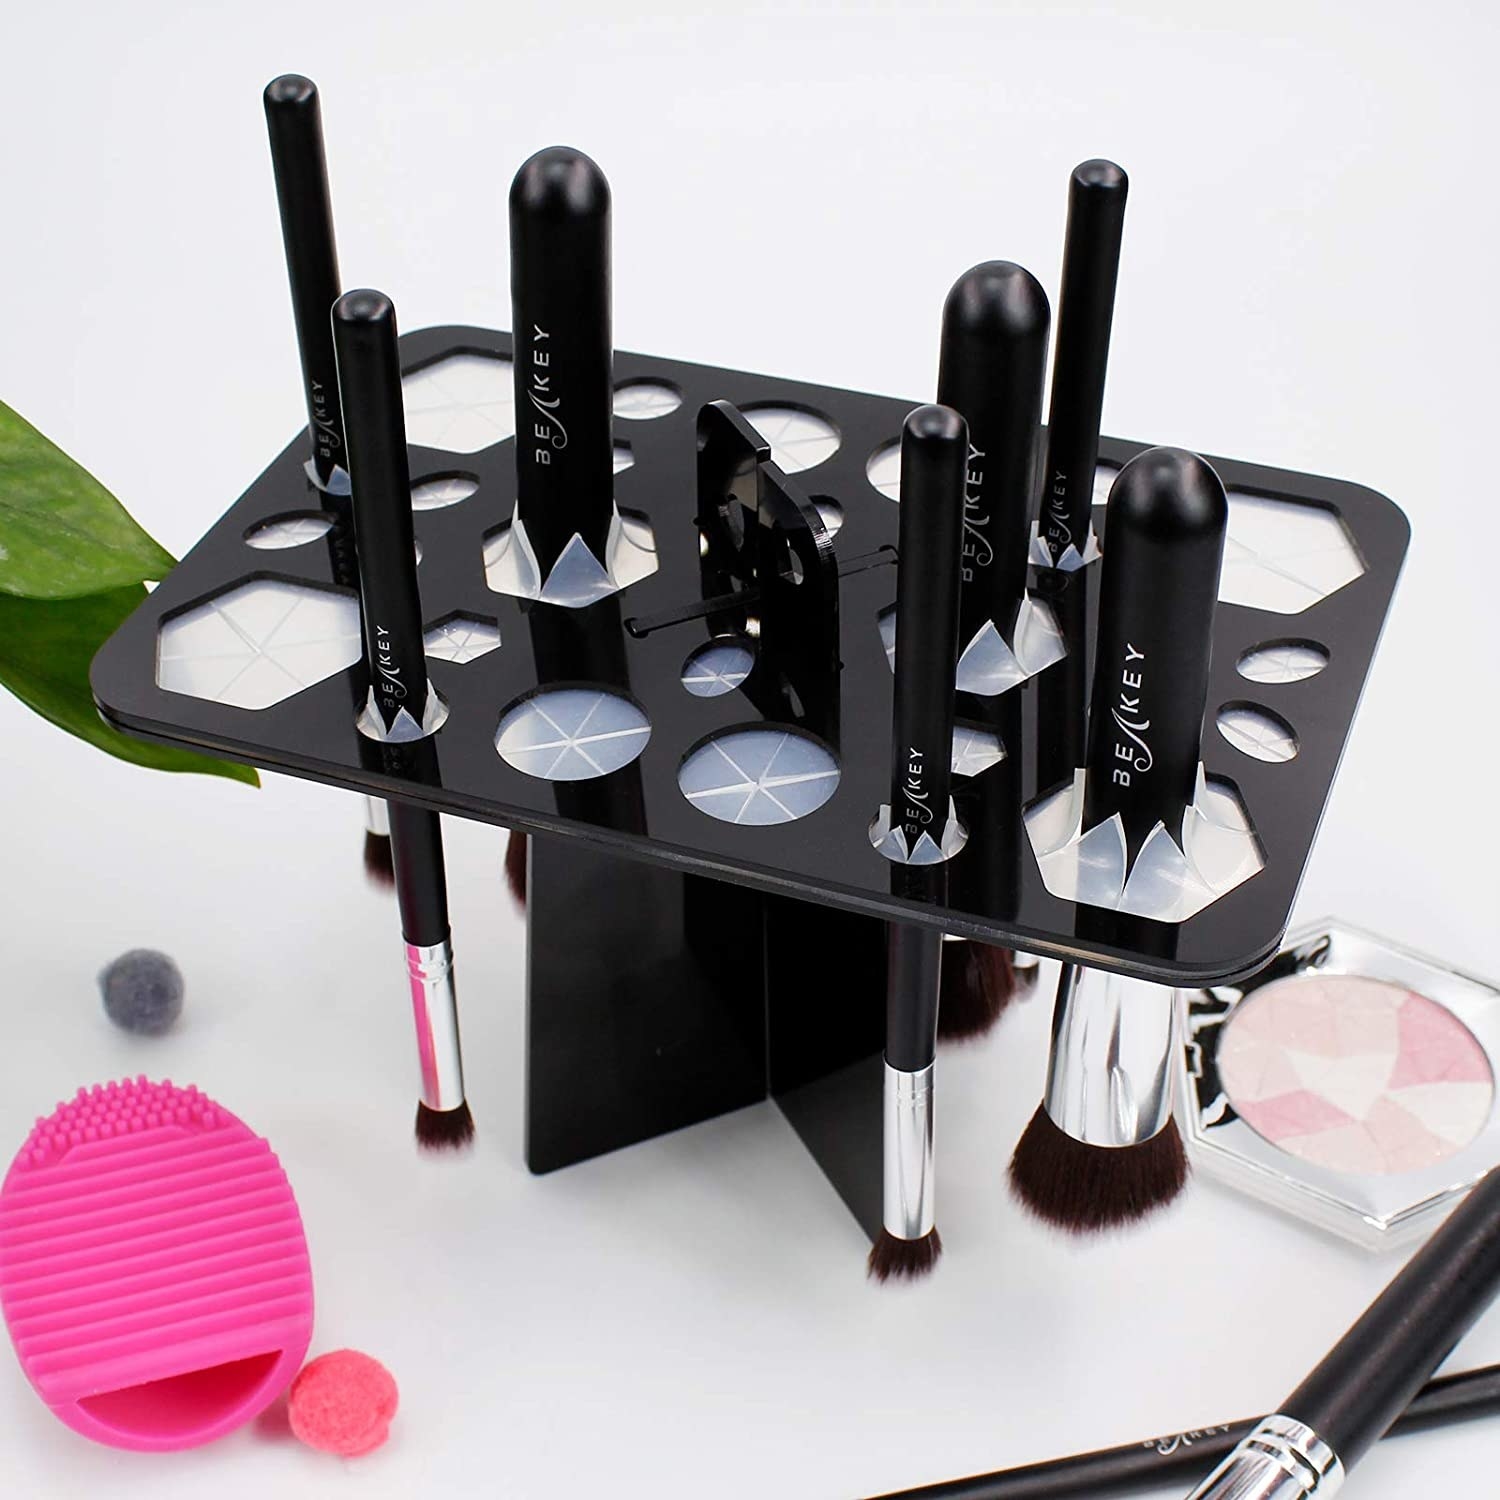 Brushes hanging in the brush holder on a table surrounded by cosmetic items